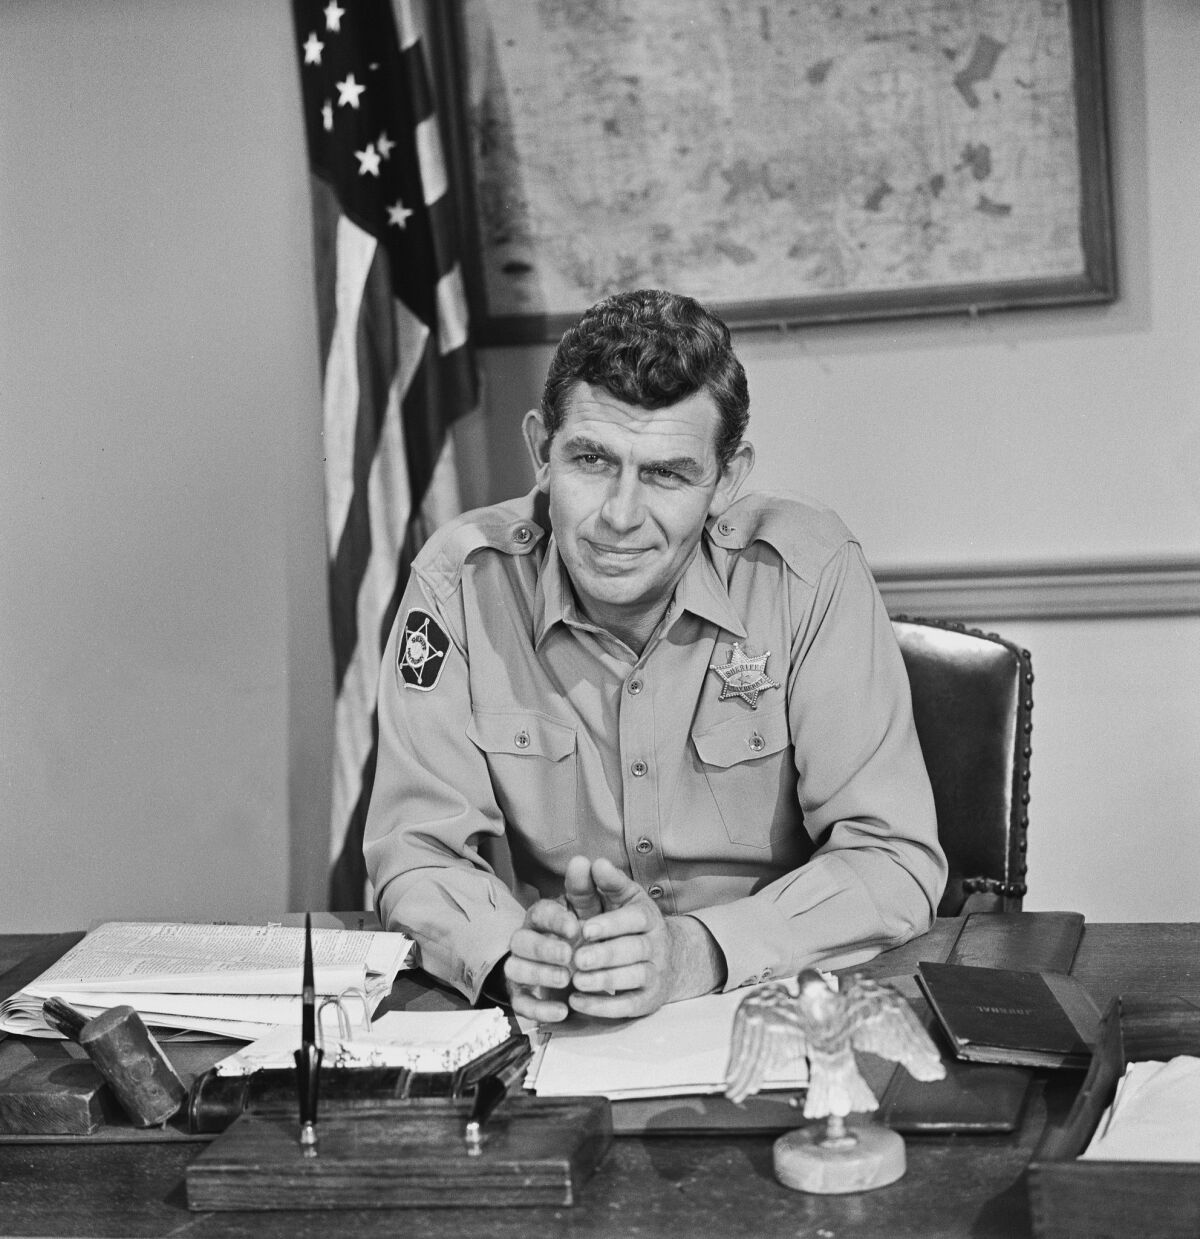 Andy Griffith in "The Andy Griffith Show."